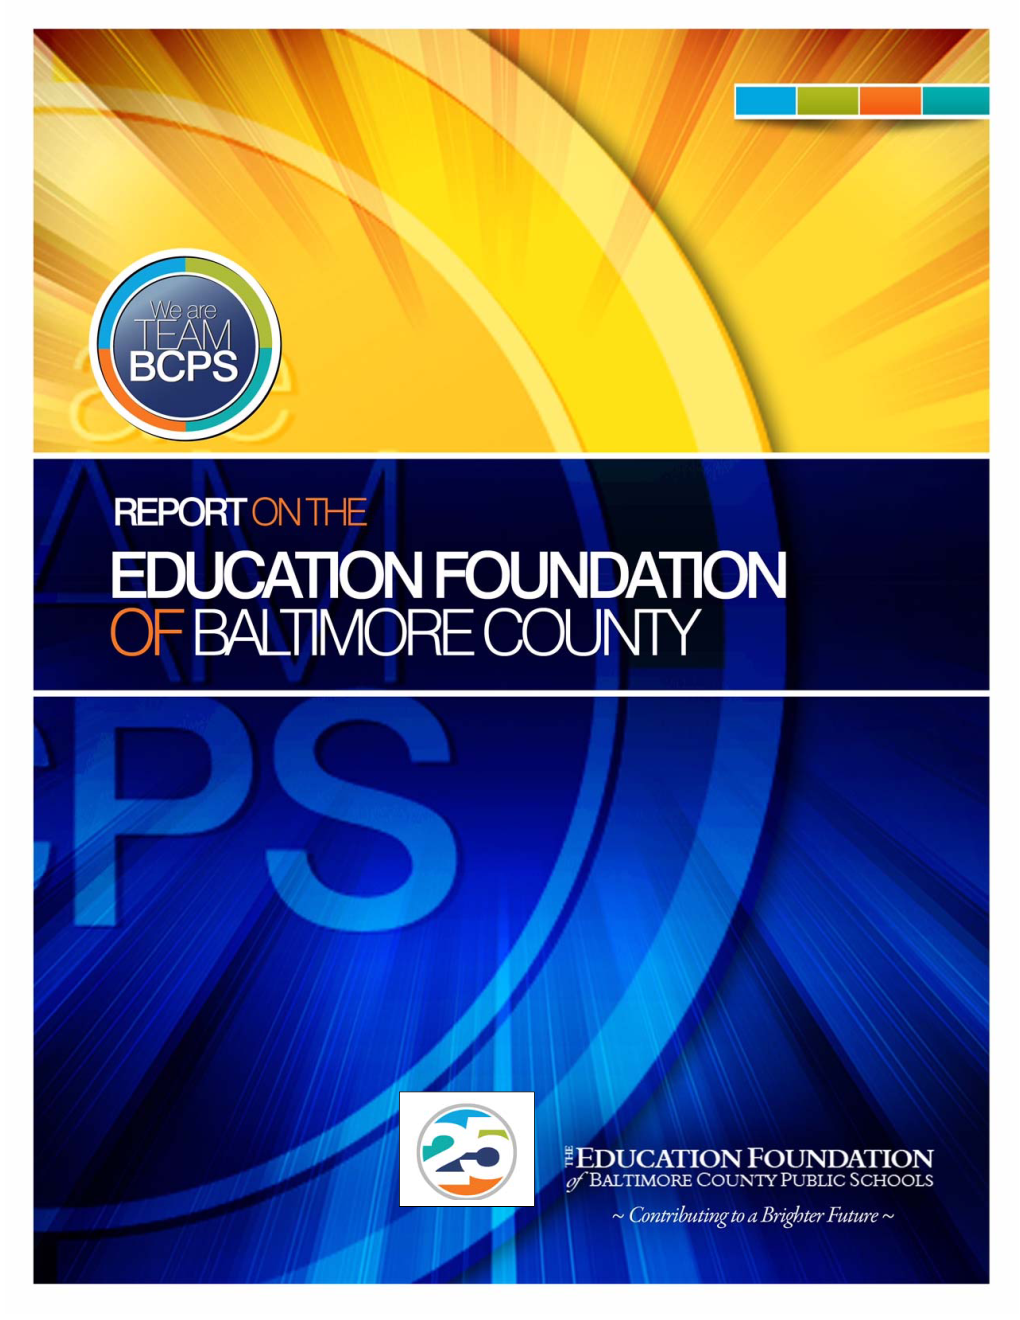 Information Contained in This Report Is Intended for the Use of the Education Foundation of Baltimore County Public Schools, Inc